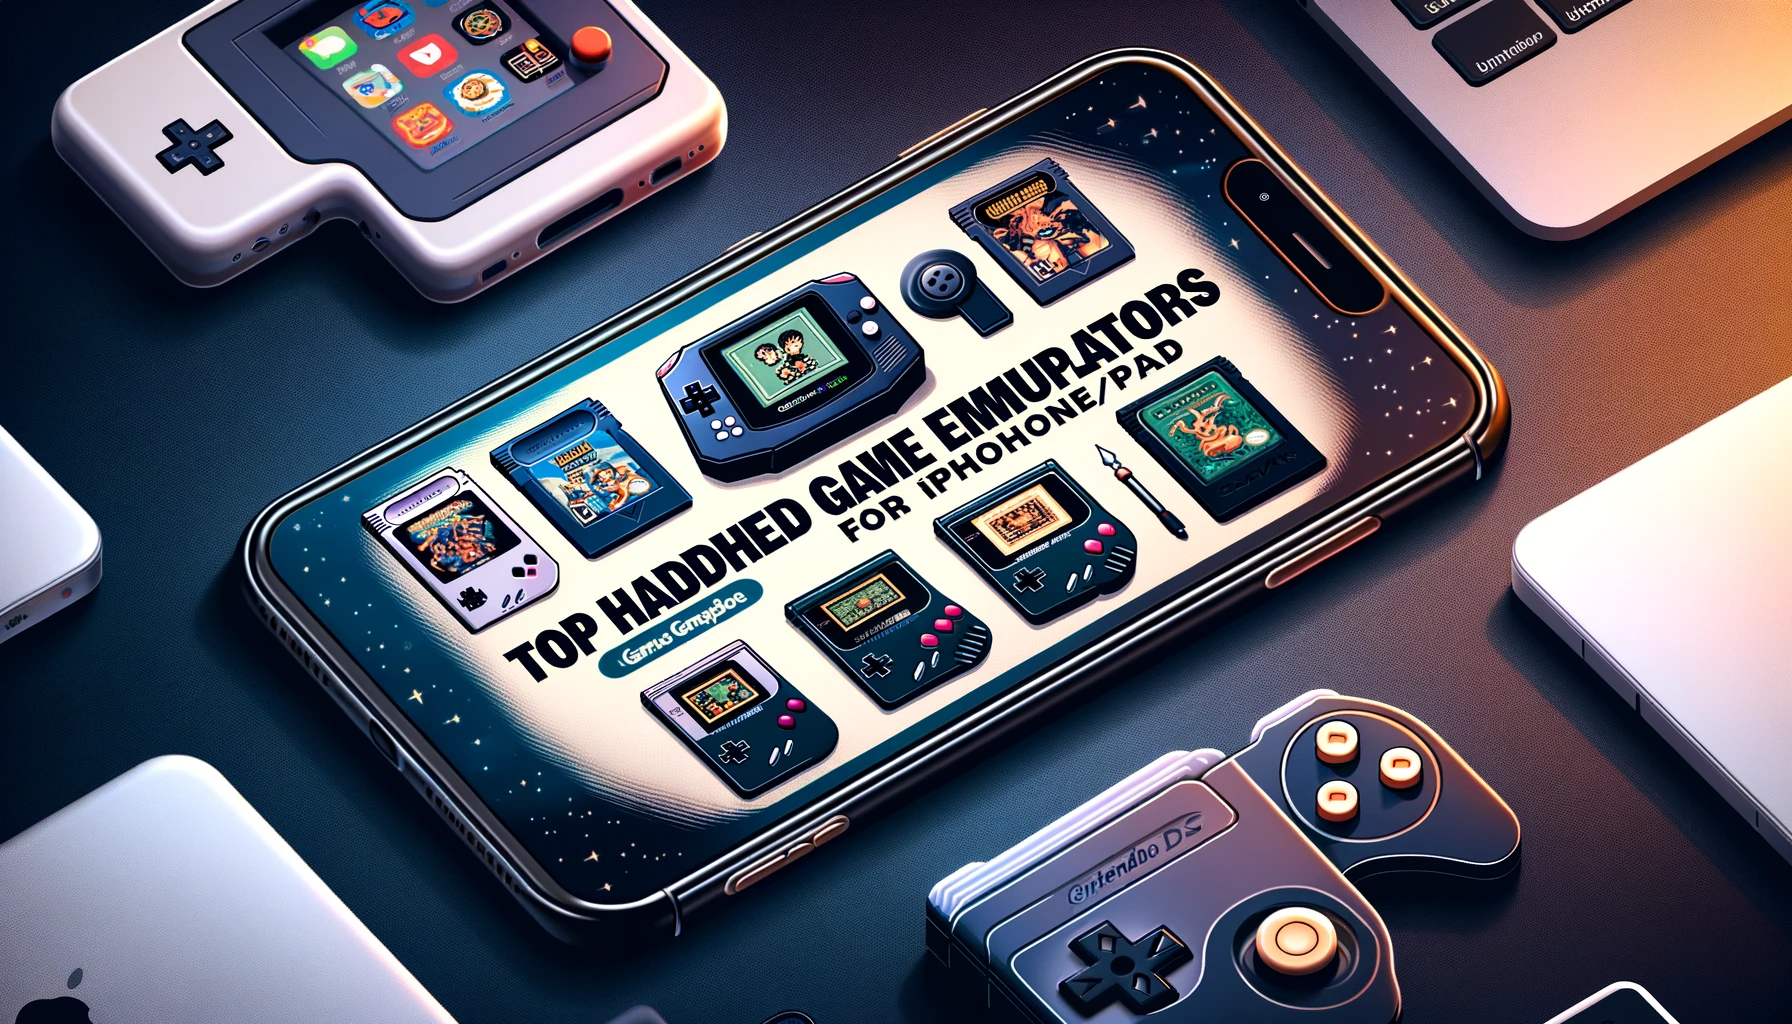 Recommending classic handheld game emulators suitable for installation on iPhone_iPad